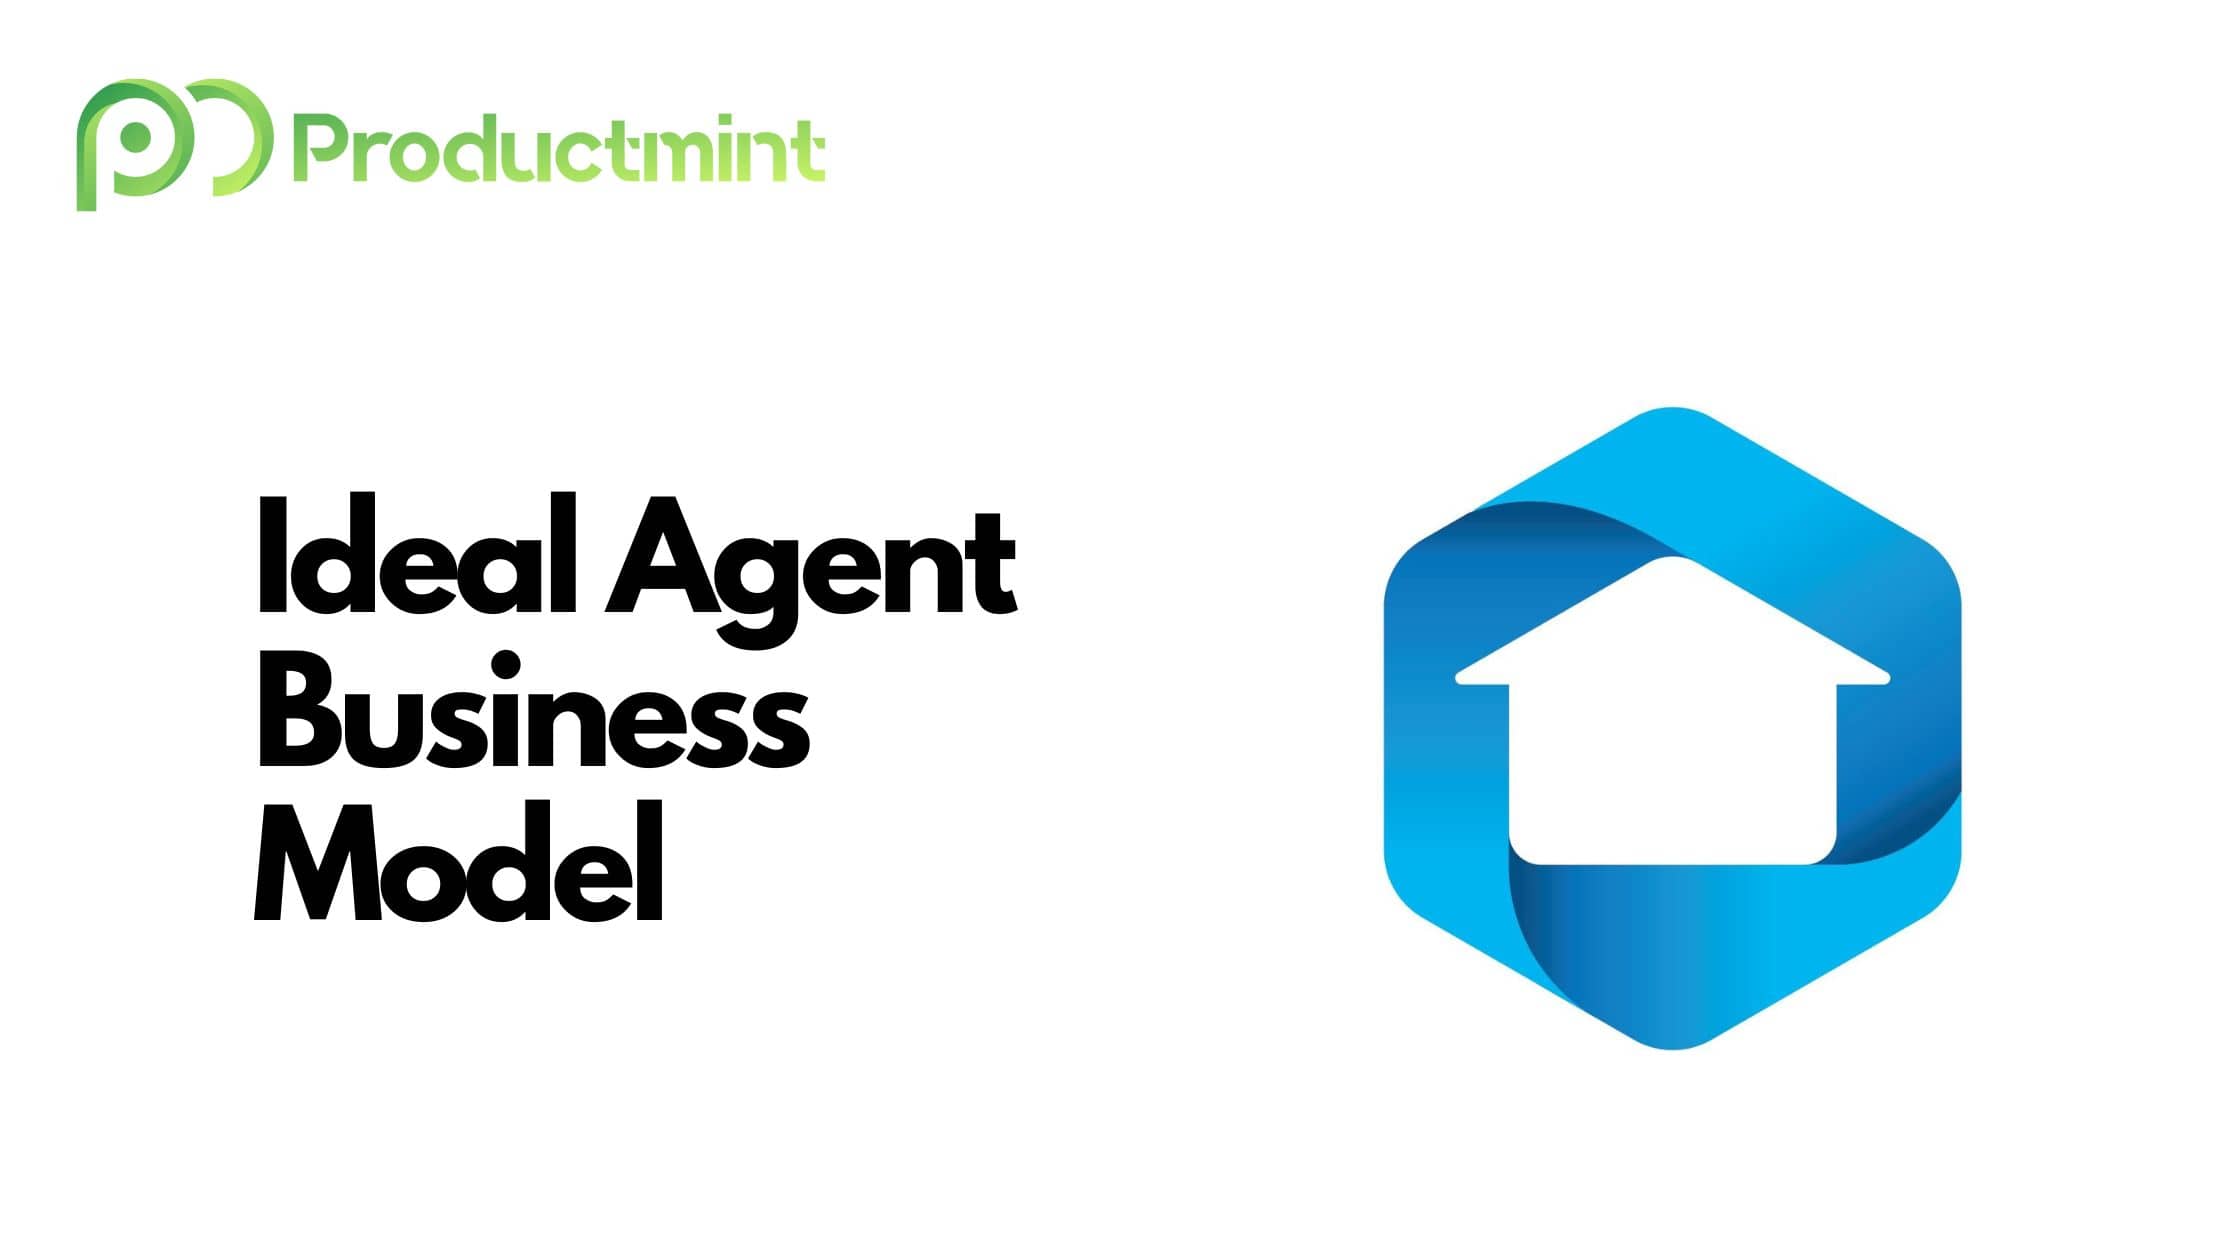 Ideal Agent Business Model